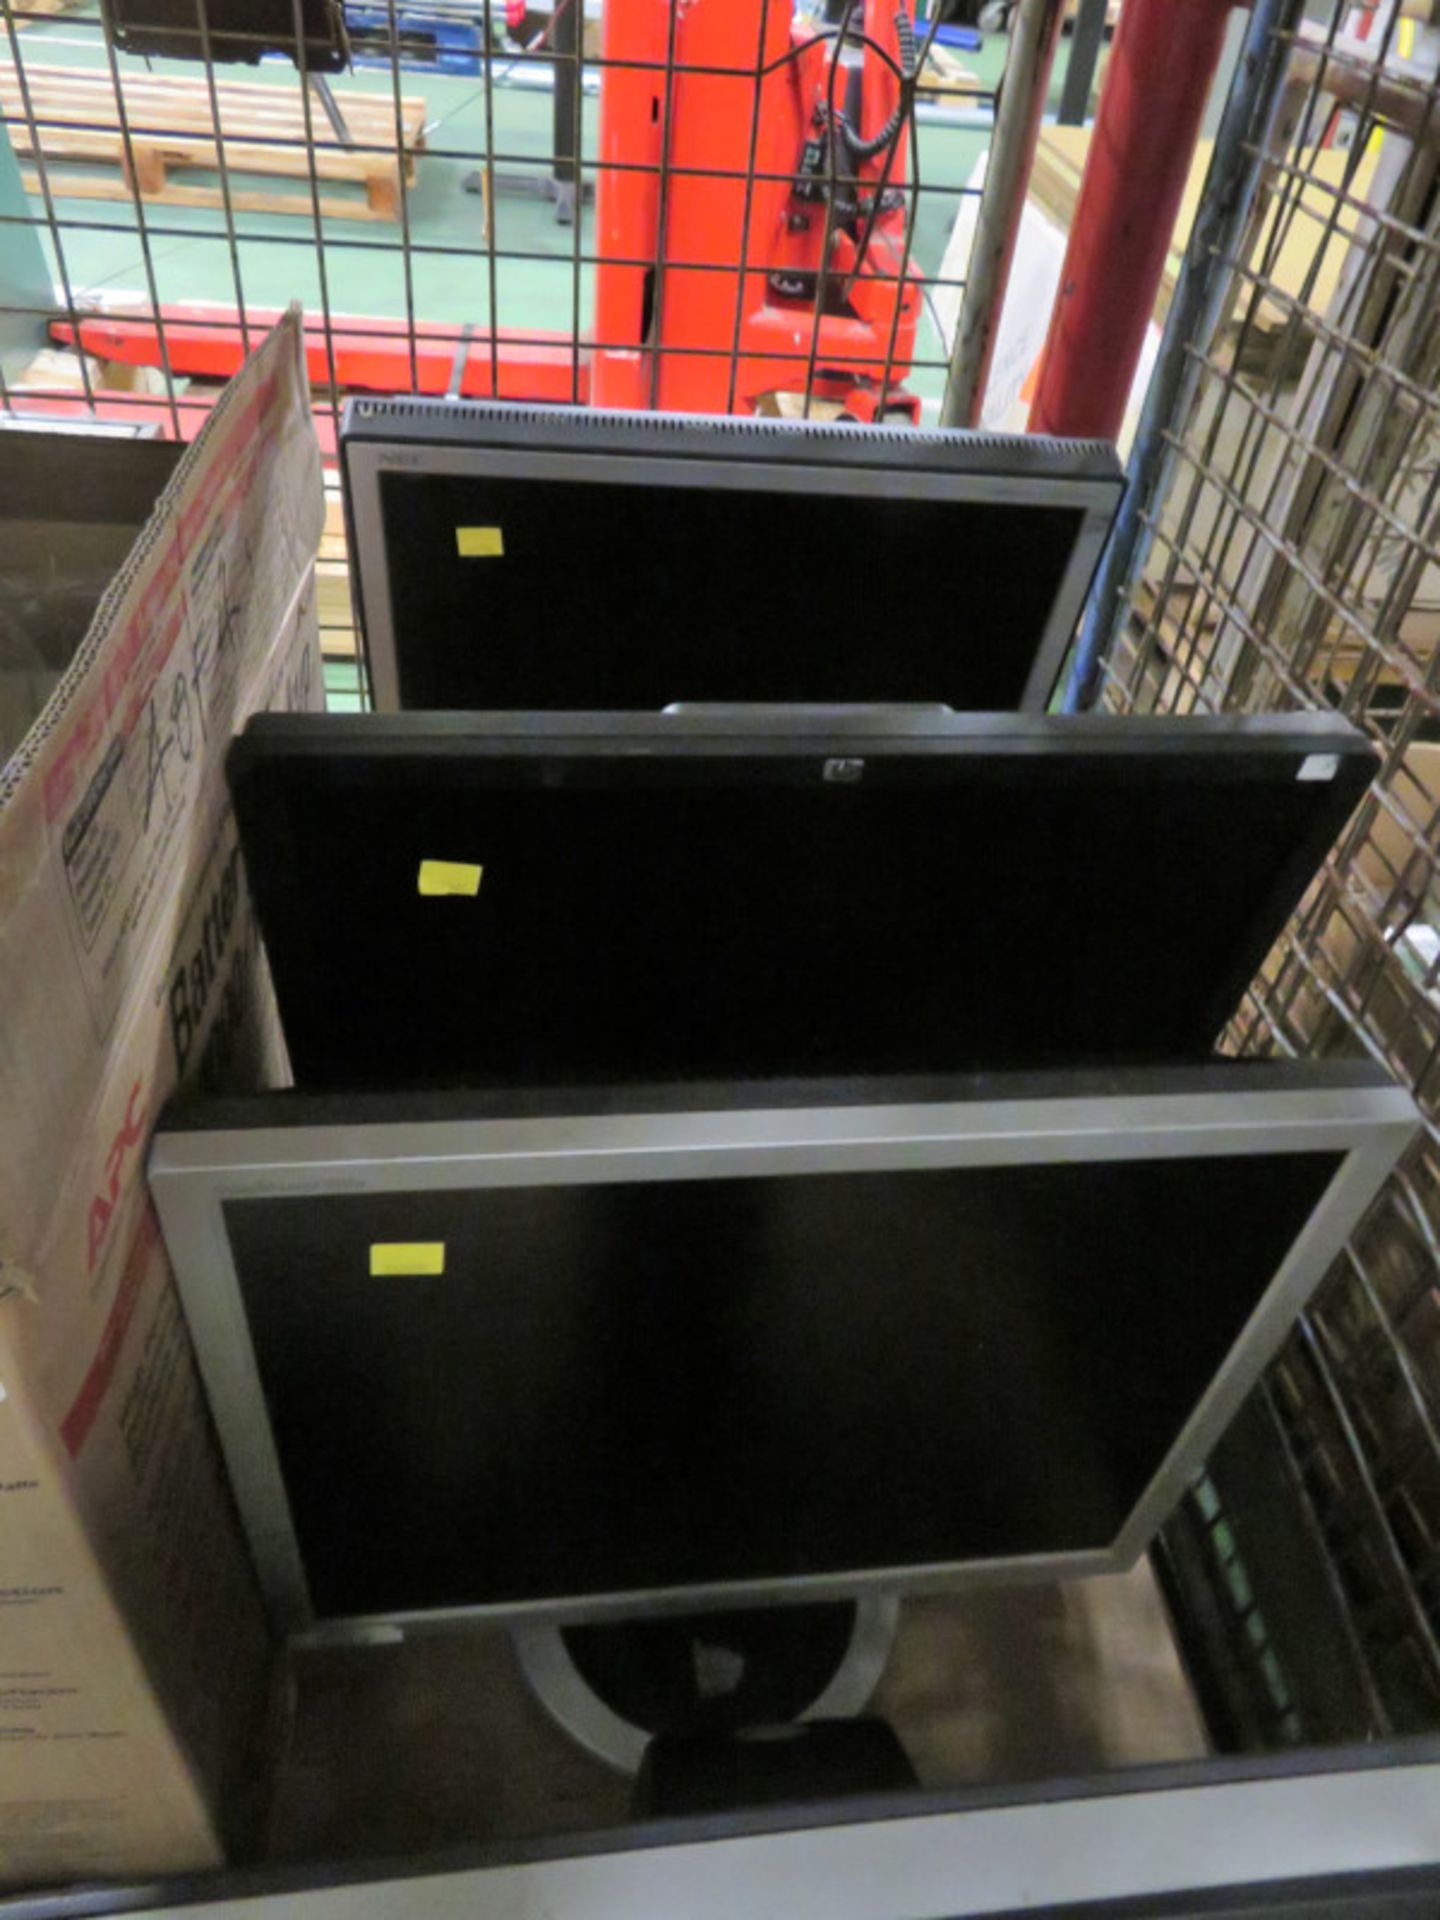 Office equipment - Monitors, keyboards, office drawers - Image 4 of 6